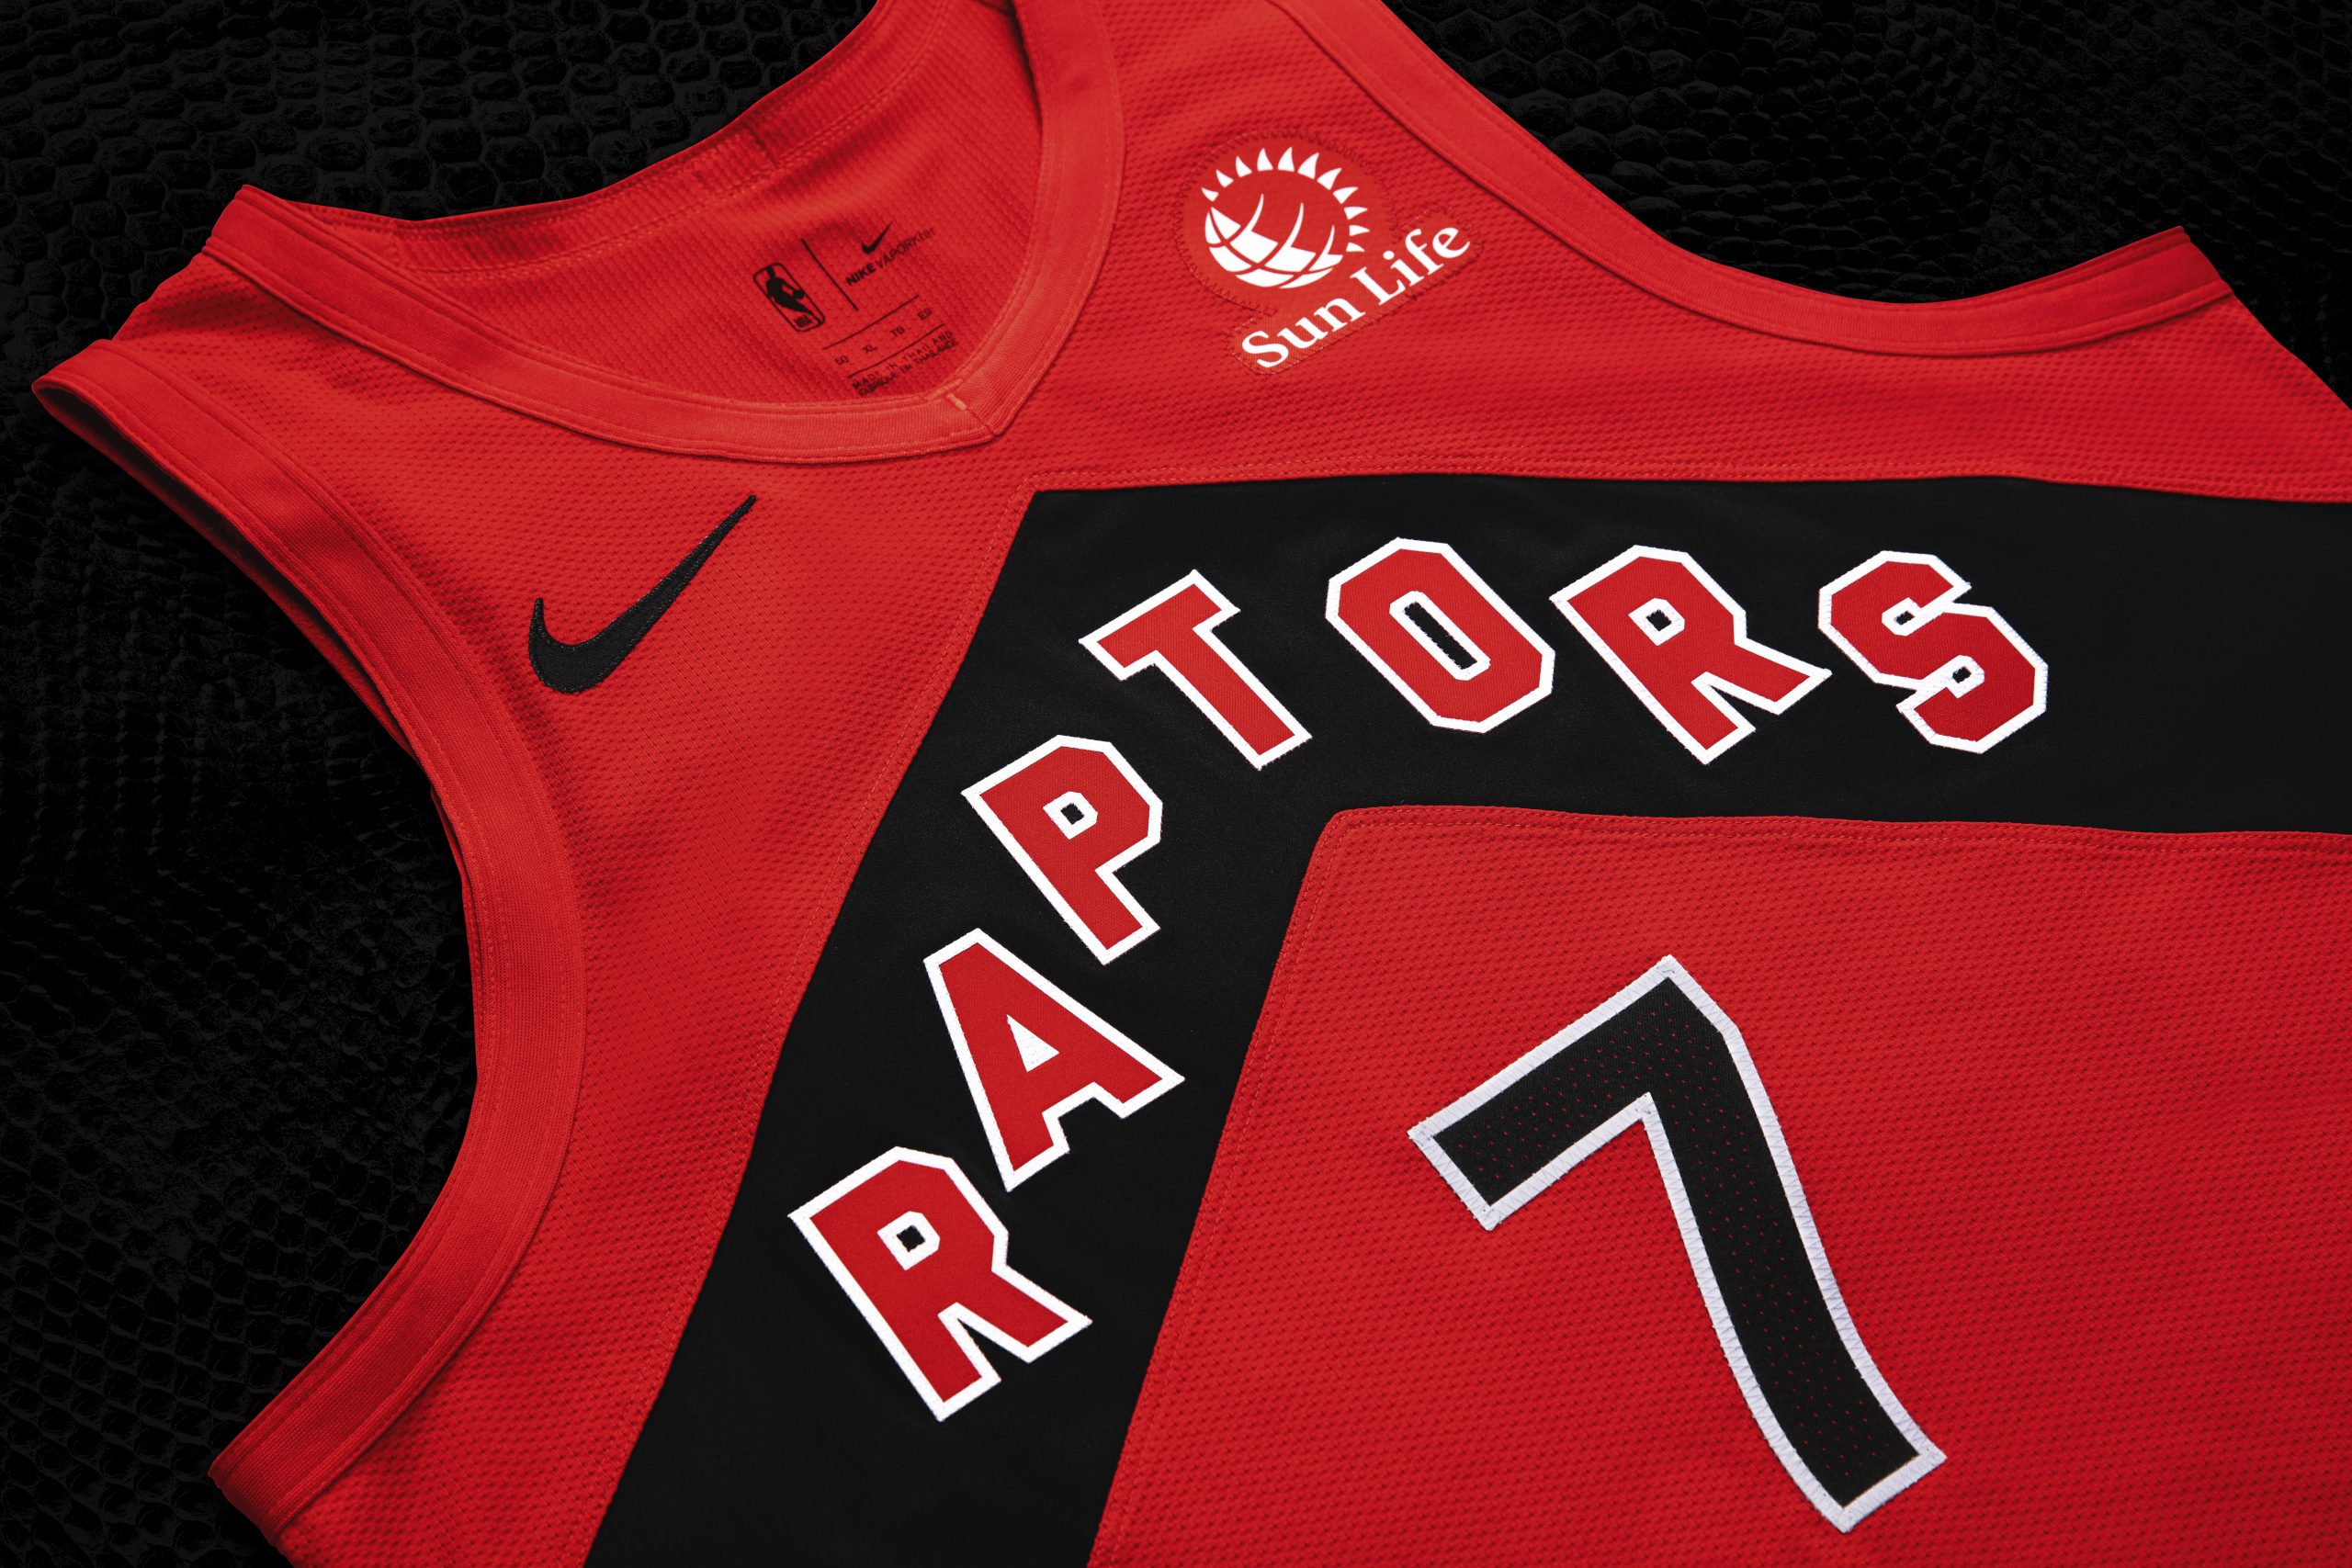 purple and red raptors jersey